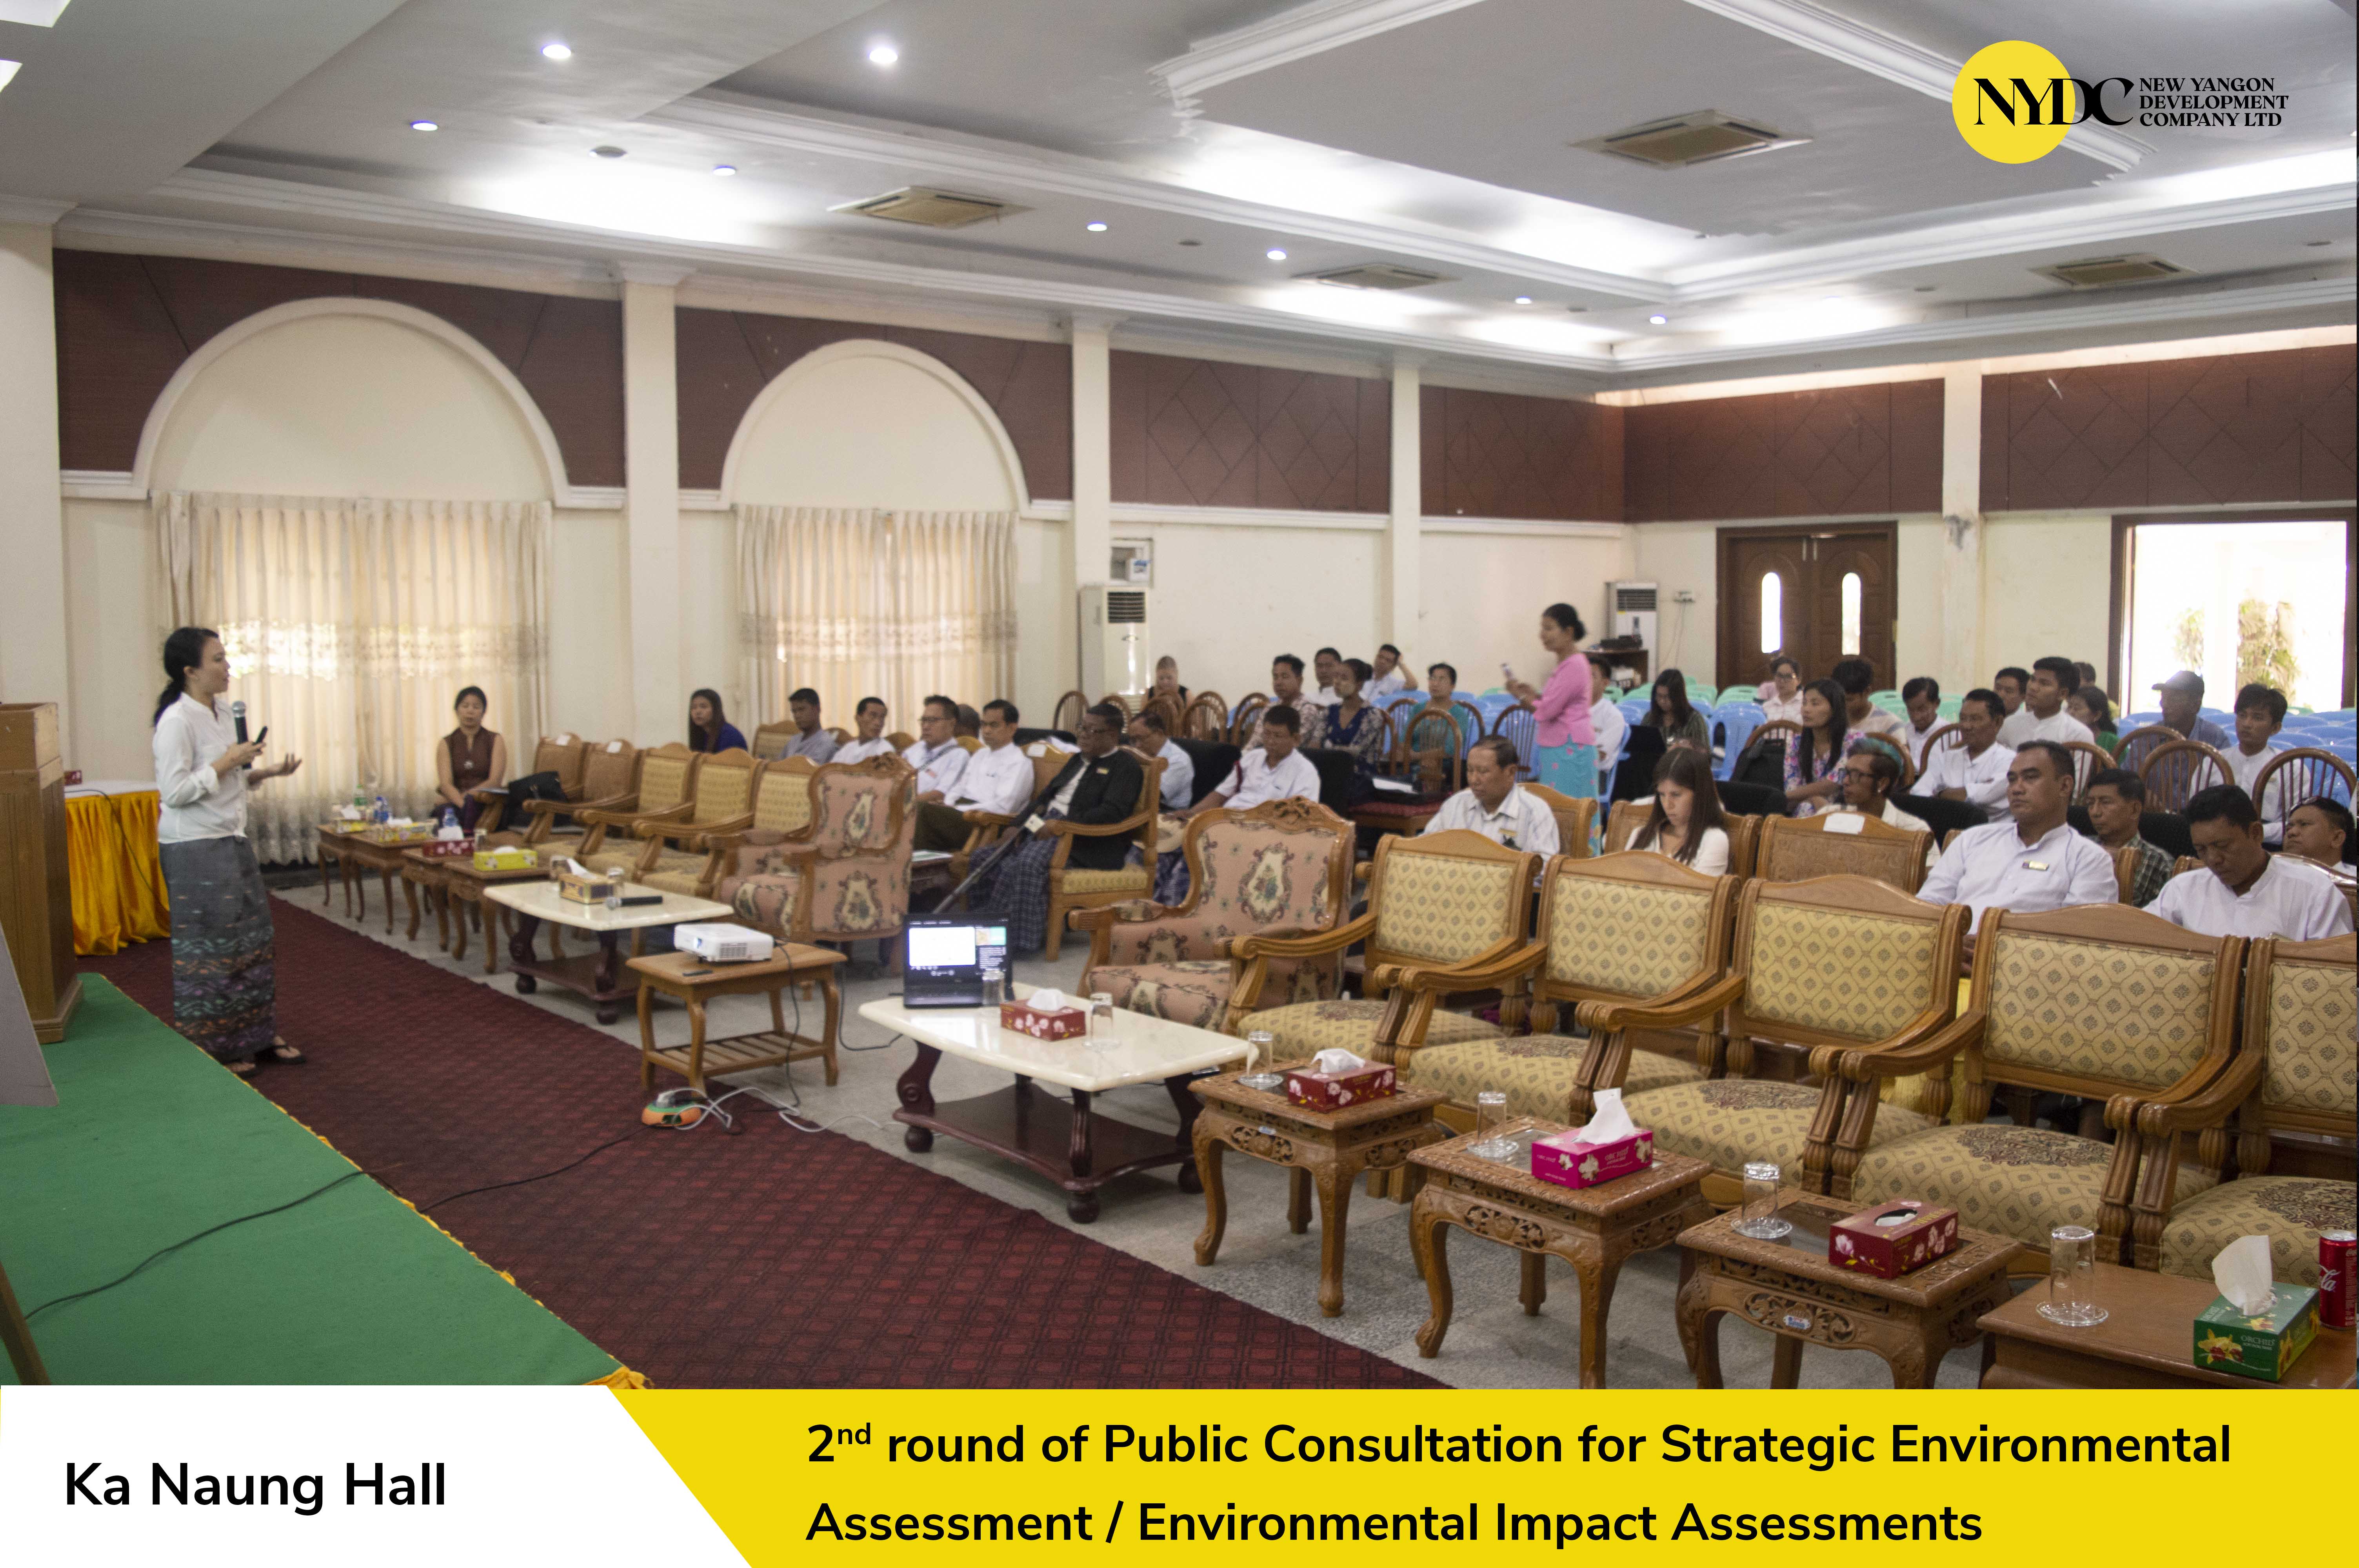 2nd Round of Public Consultation for Strategic Environmental Assessment / Environmental Impact Assessments